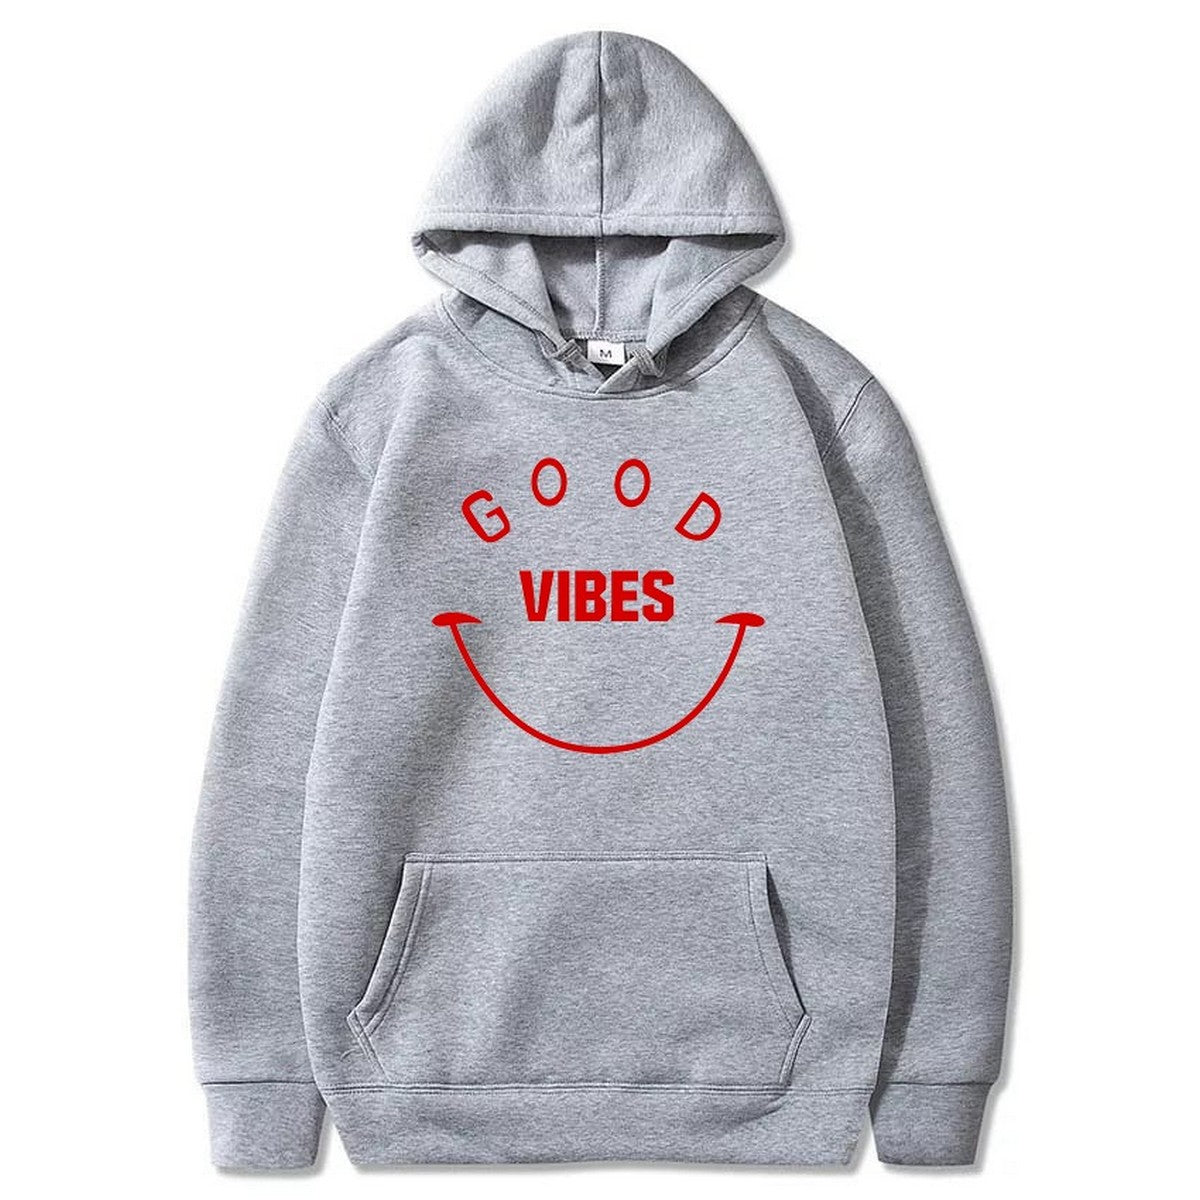 Good Vibes Printed Fleece Full Sleeves Pull Over Hoodie For Men And Women